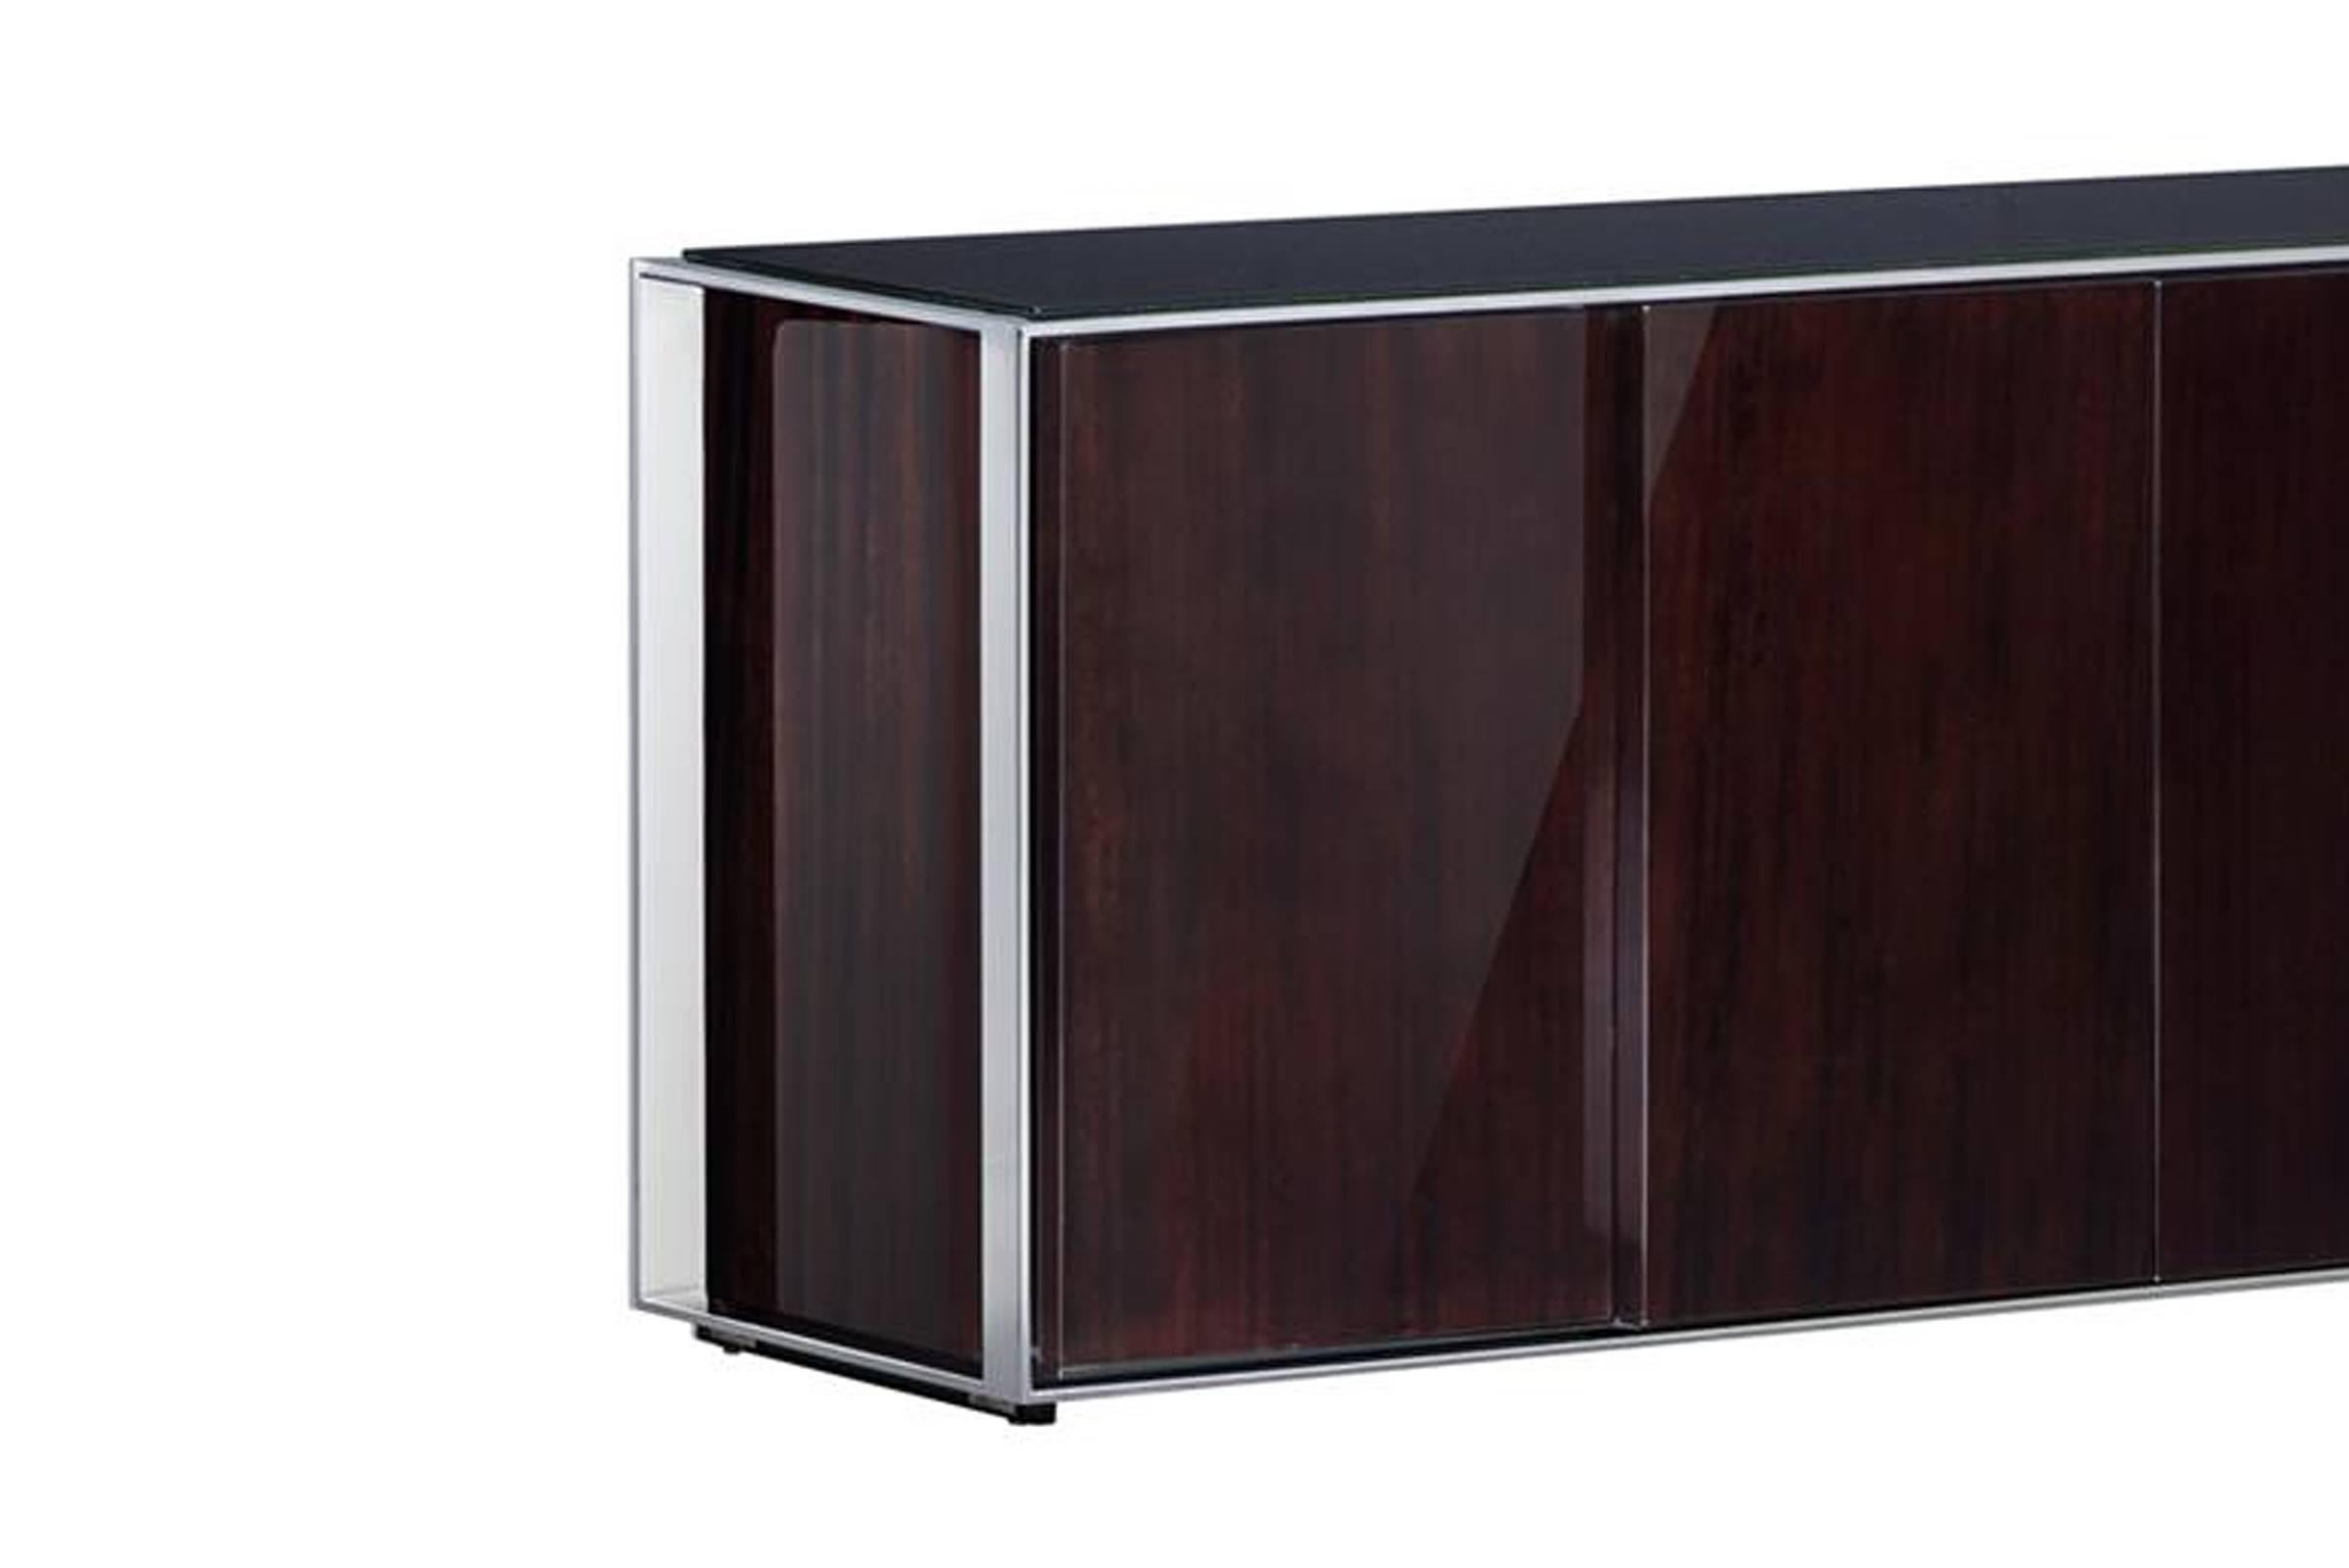 Sideboard Chicago in high gloss ebony finish
and polished stainless steel.
